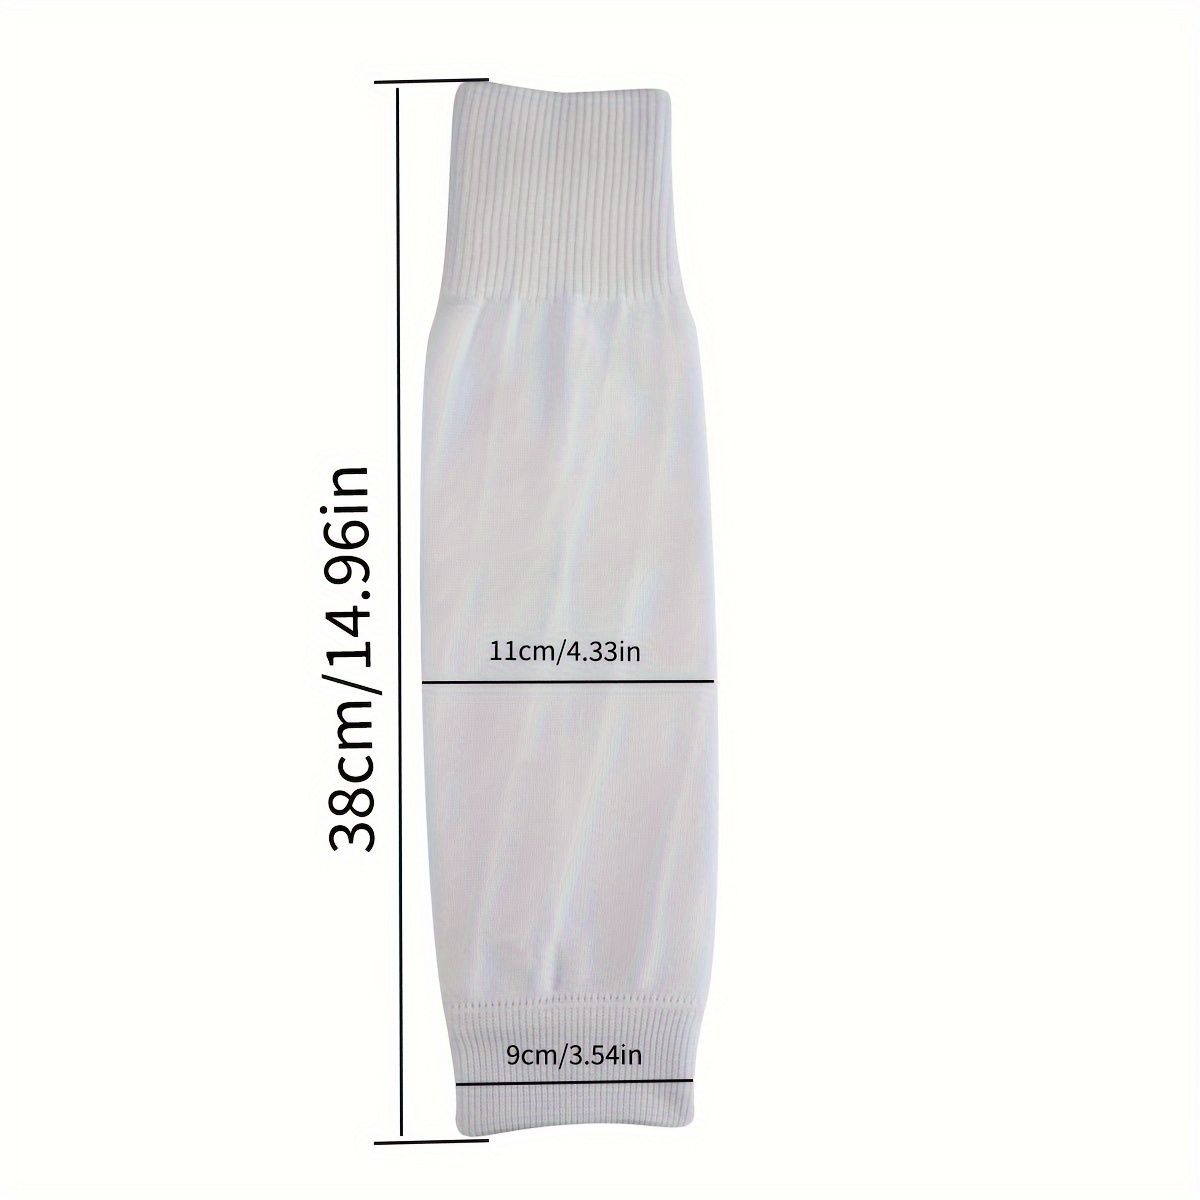 Compression Leg Sleeve With Shin Guard Tape Soccer For Men And Women Ideal  For Cycling, Running, Football, Basketball, And Sports Provides Calf  Support From Emmagame1, $1.41